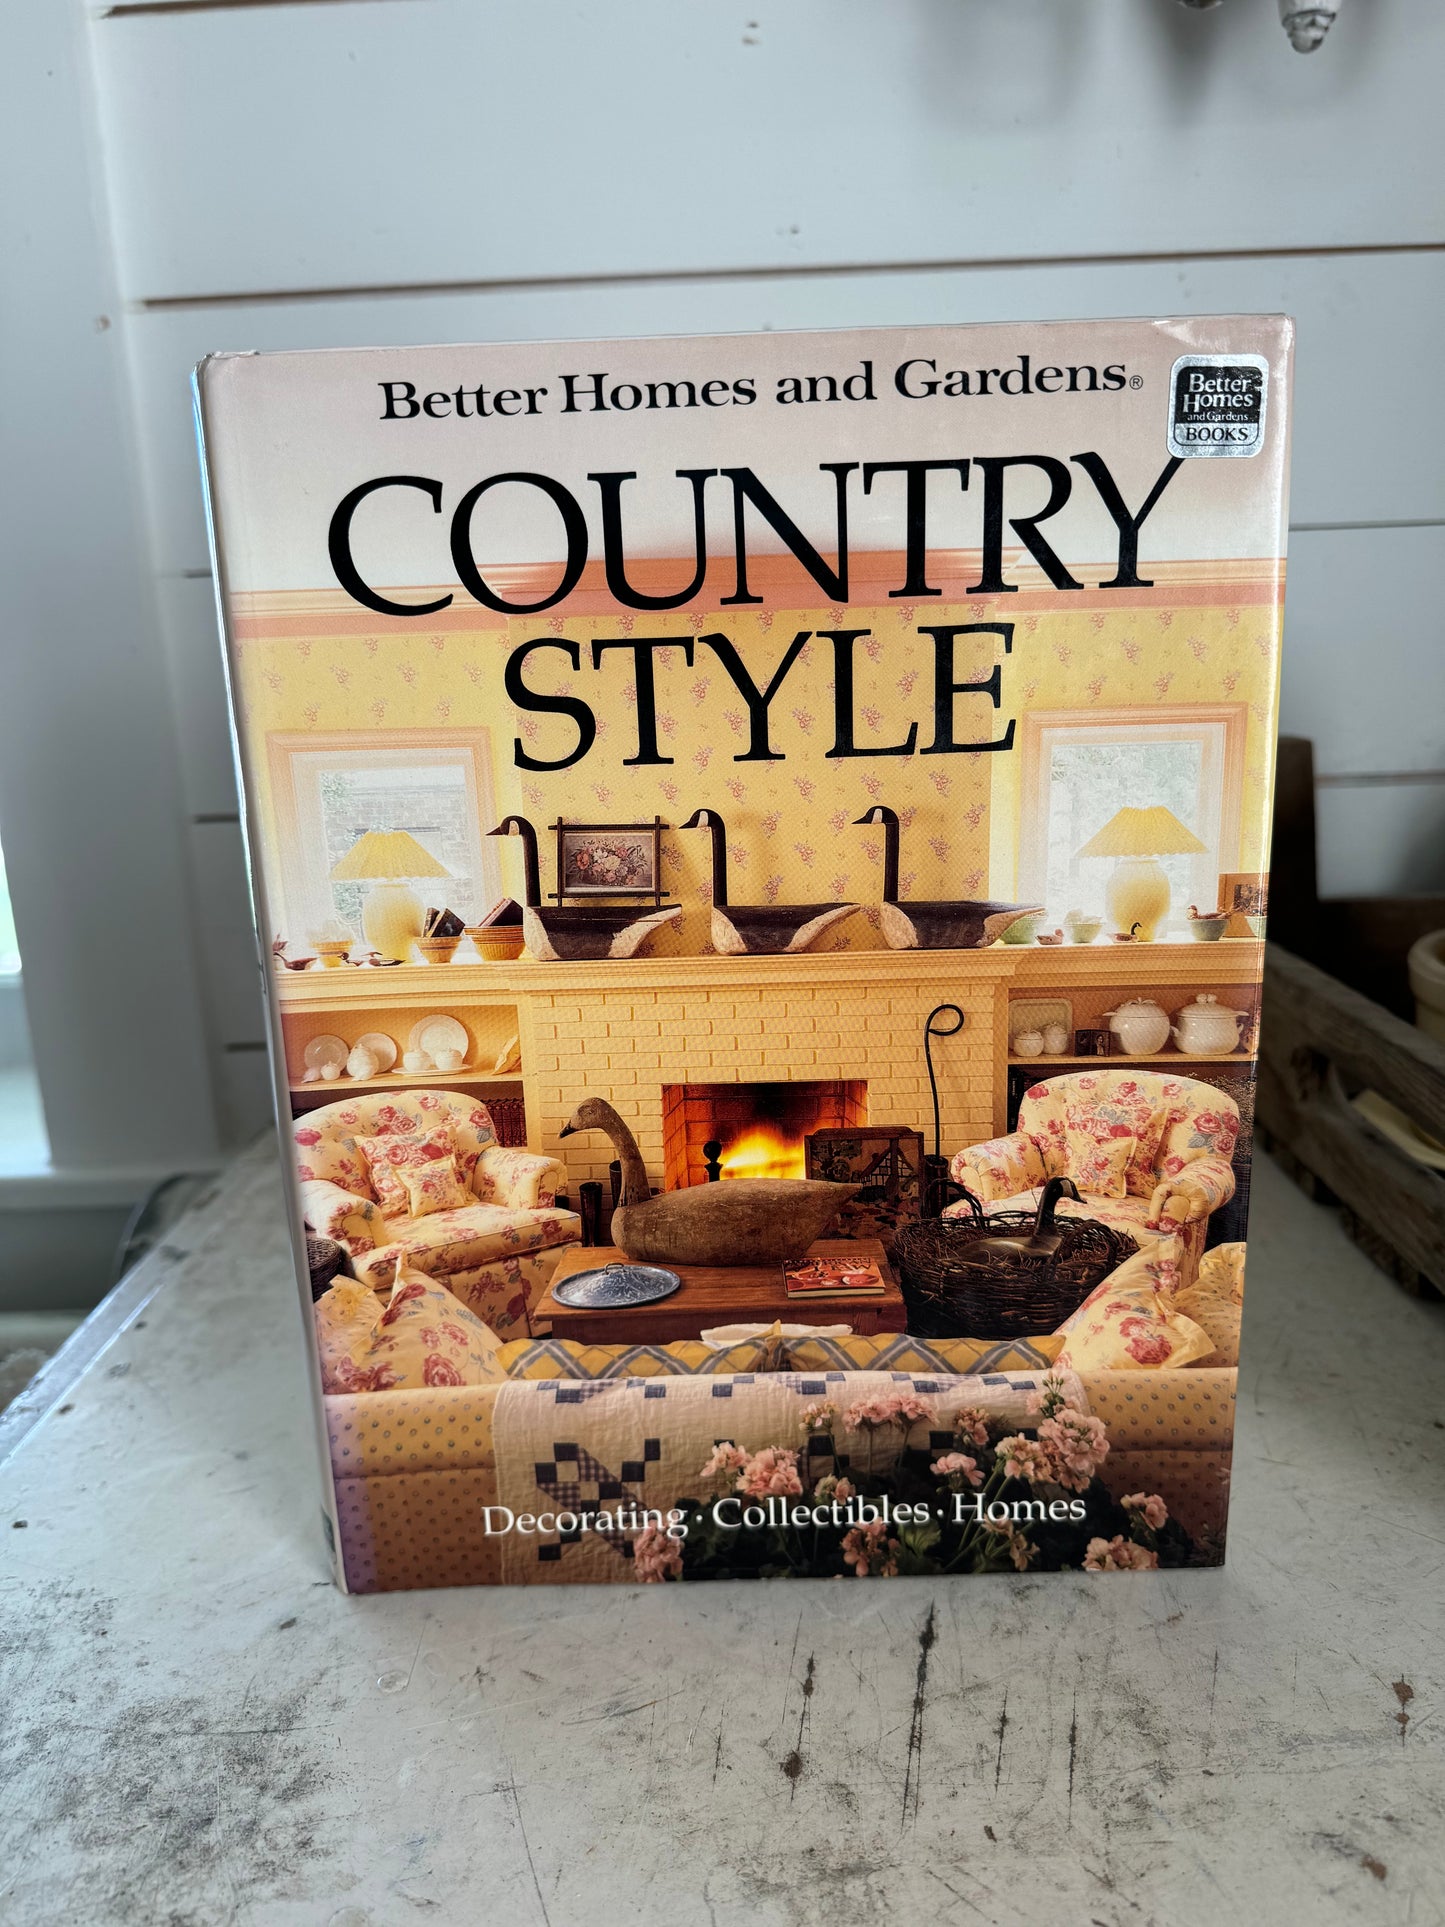 Better Homes and Gardens Country Style